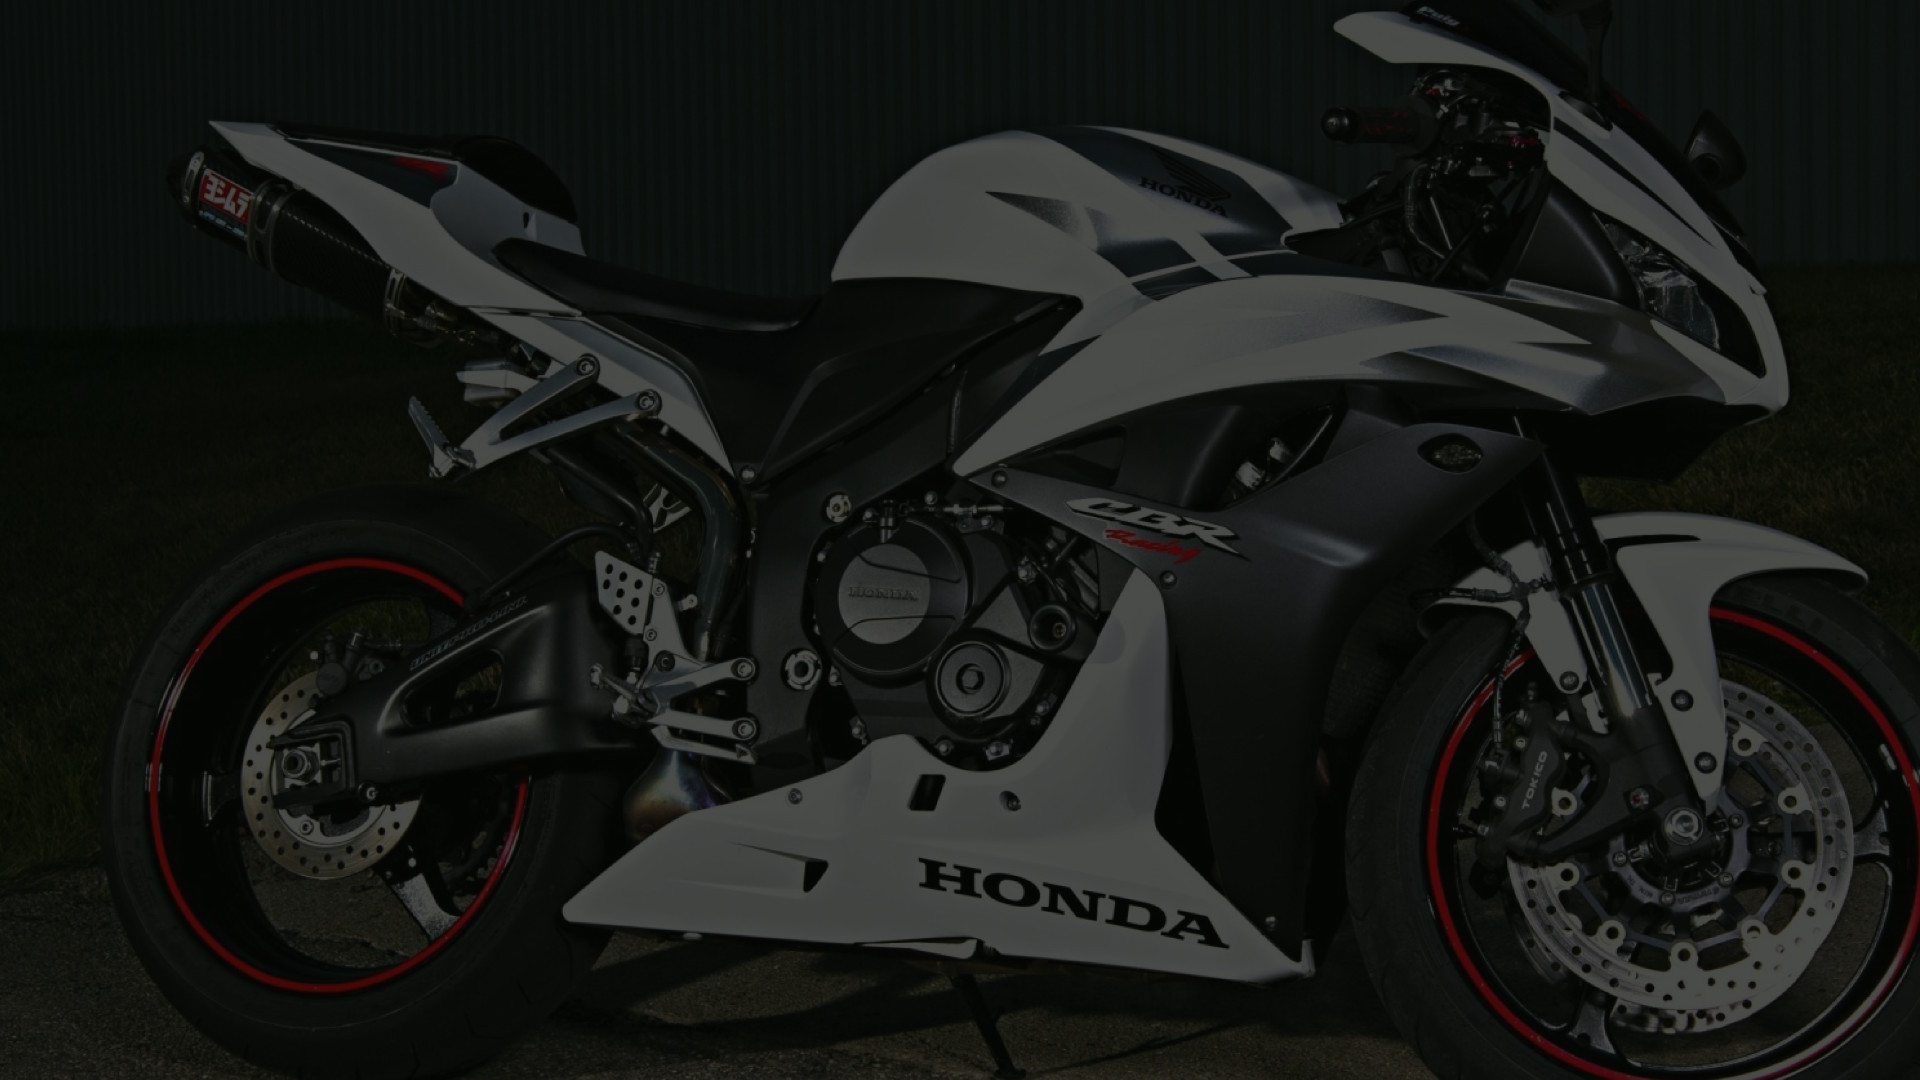 Front Bracket Racing With Airduct - Honda 600rr , HD Wallpaper & Backgrounds